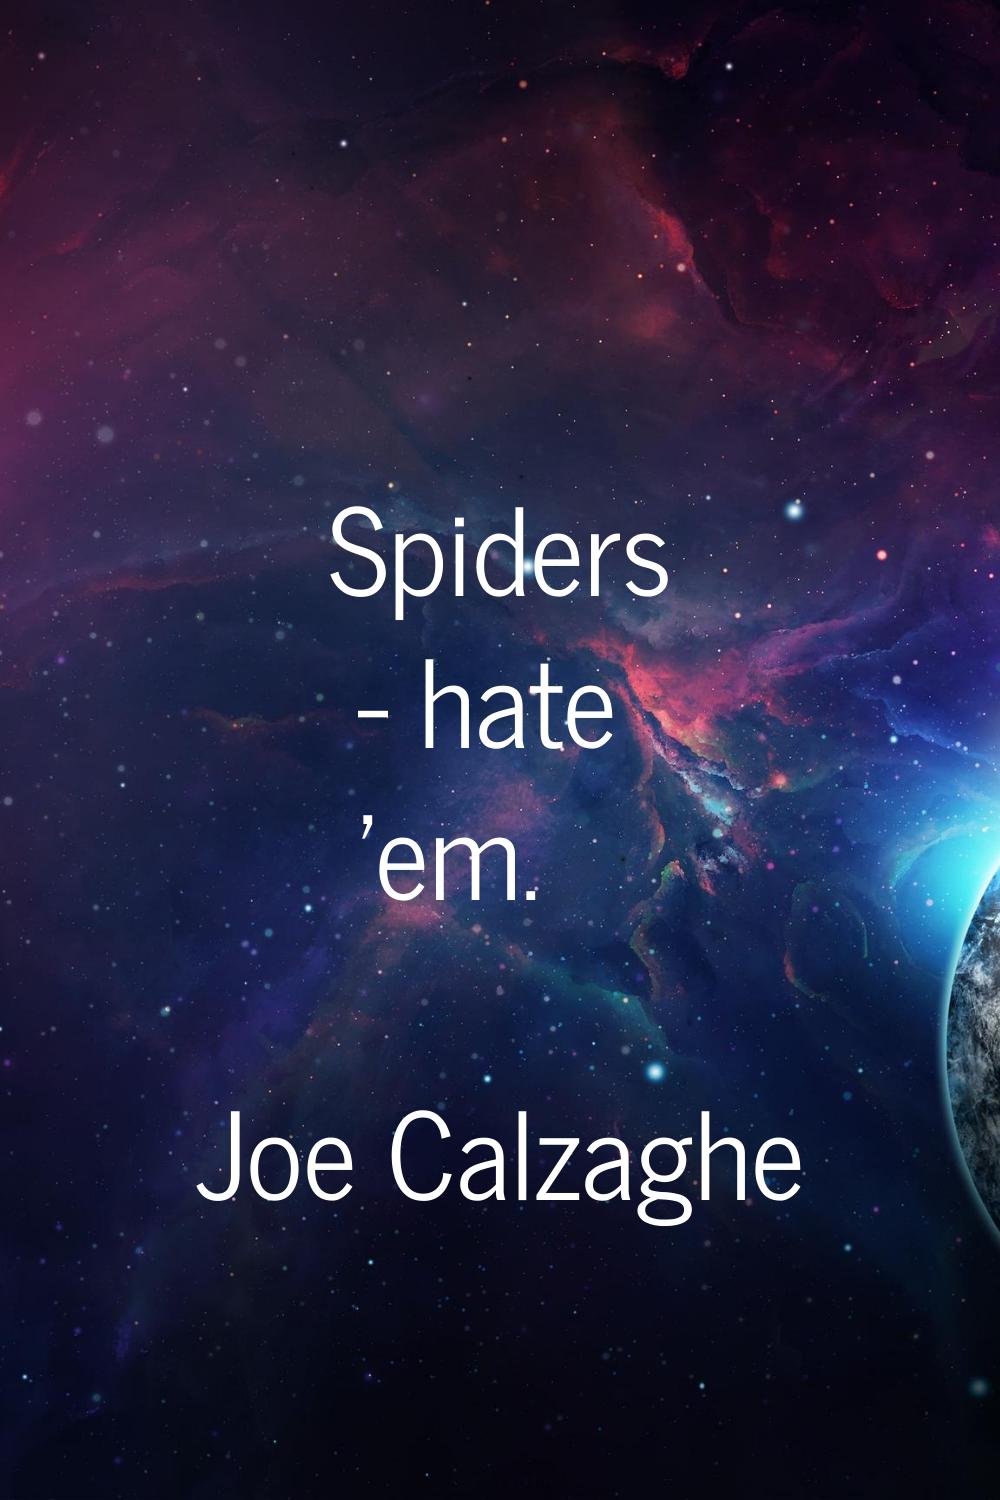 Spiders - hate 'em.